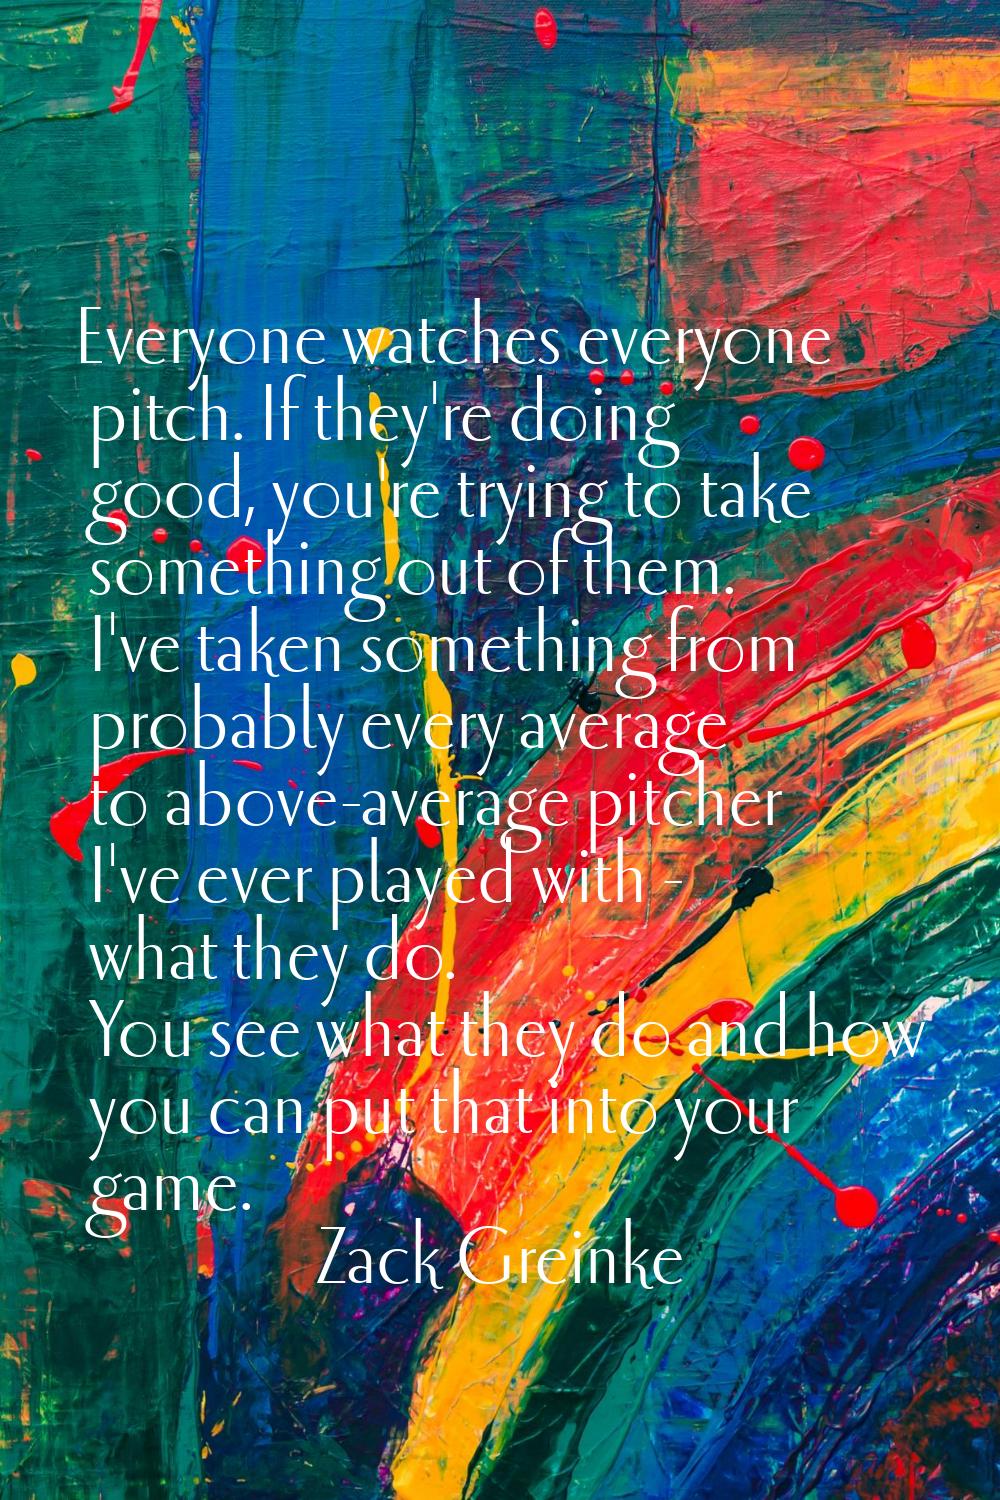 Everyone watches everyone pitch. If they're doing good, you're trying to take something out of them